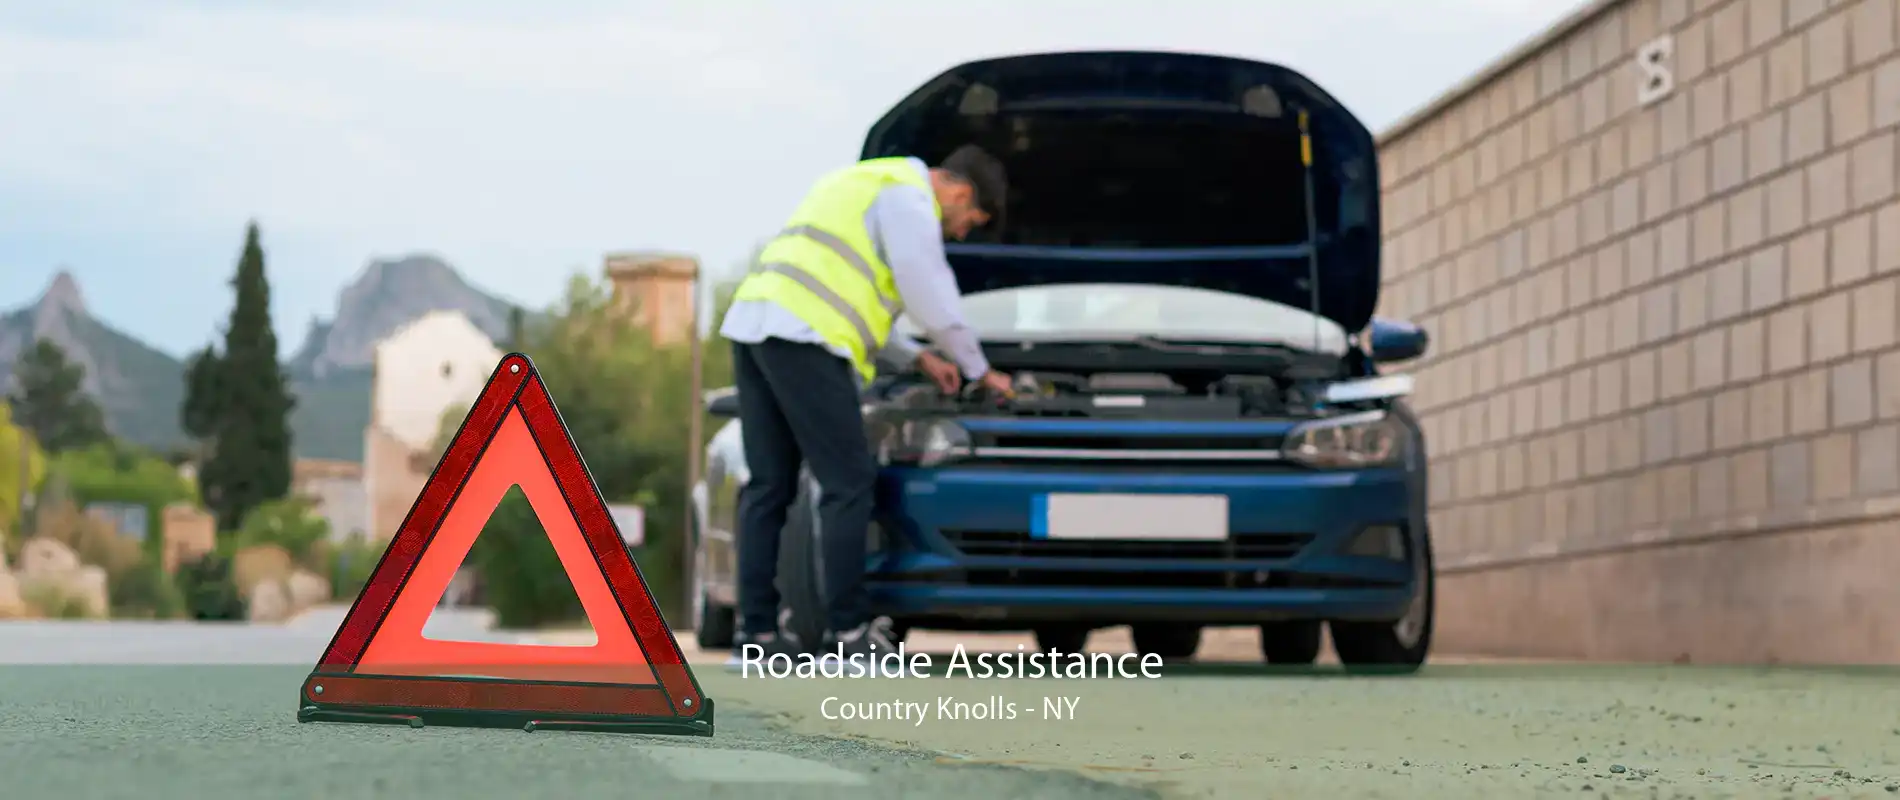 Roadside Assistance Country Knolls - NY